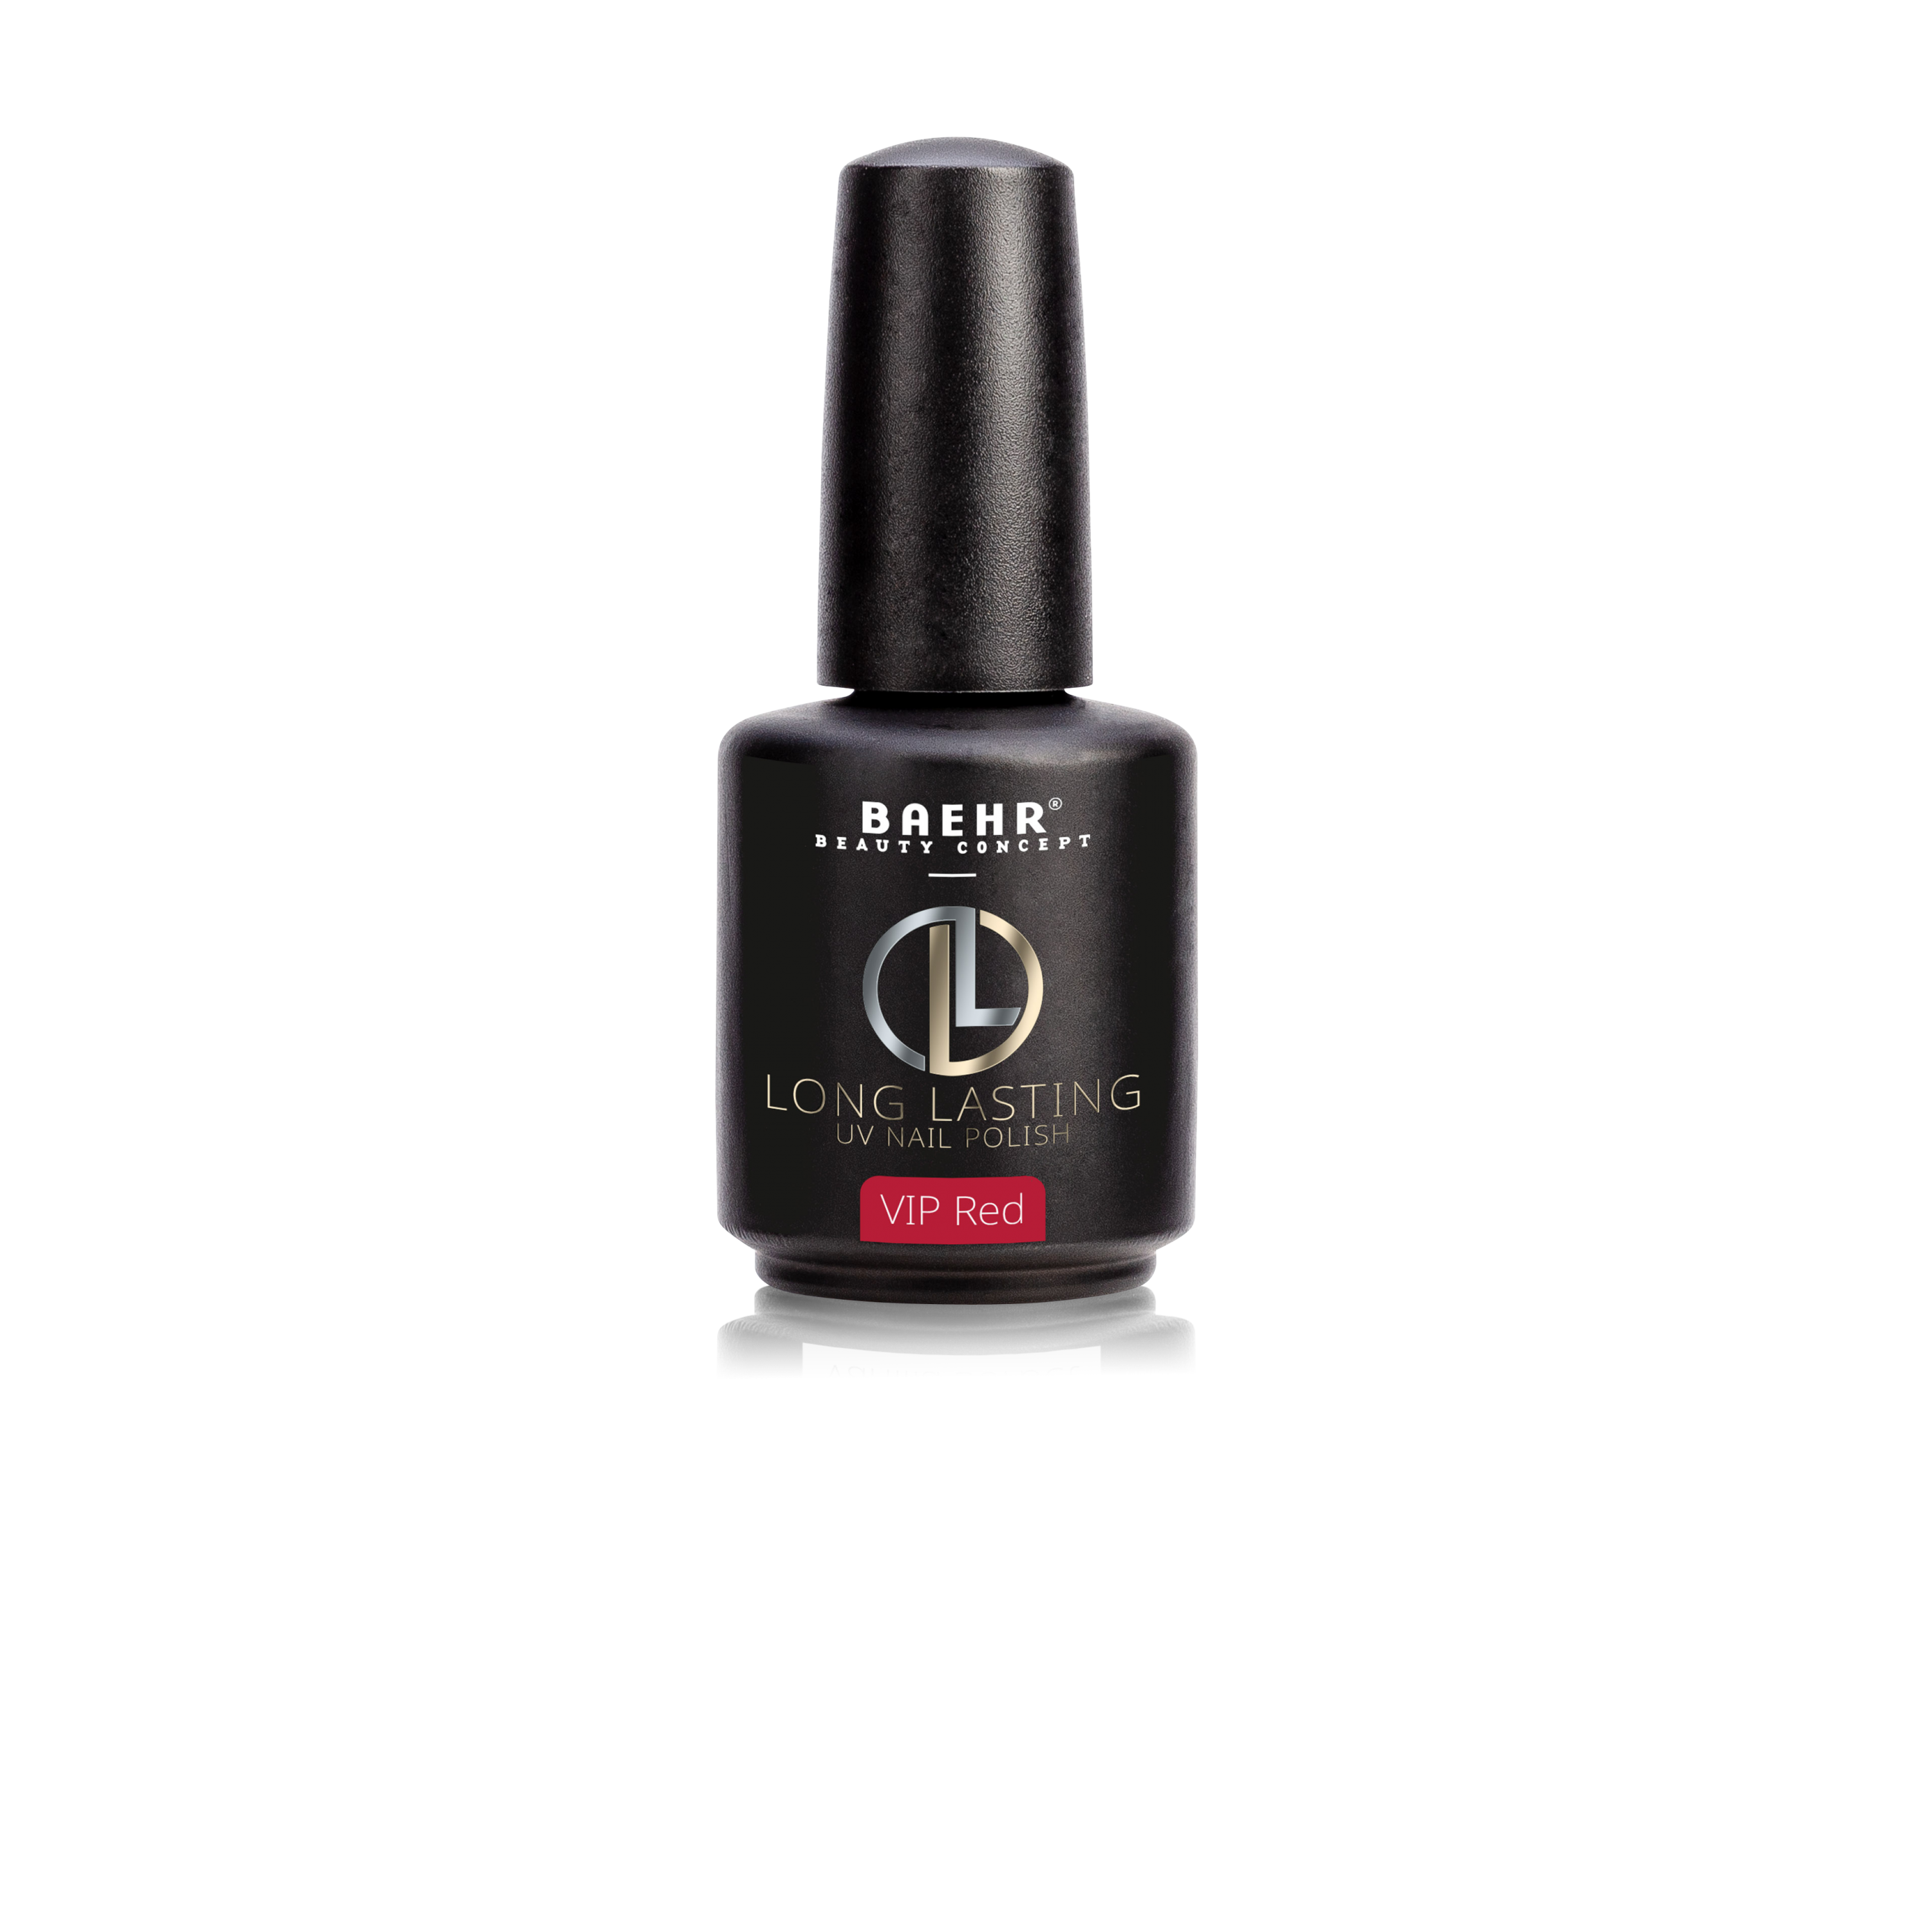 BAEHR BEAUTY CONCEPT - NAILS Long Lasting VIP Red 13 g